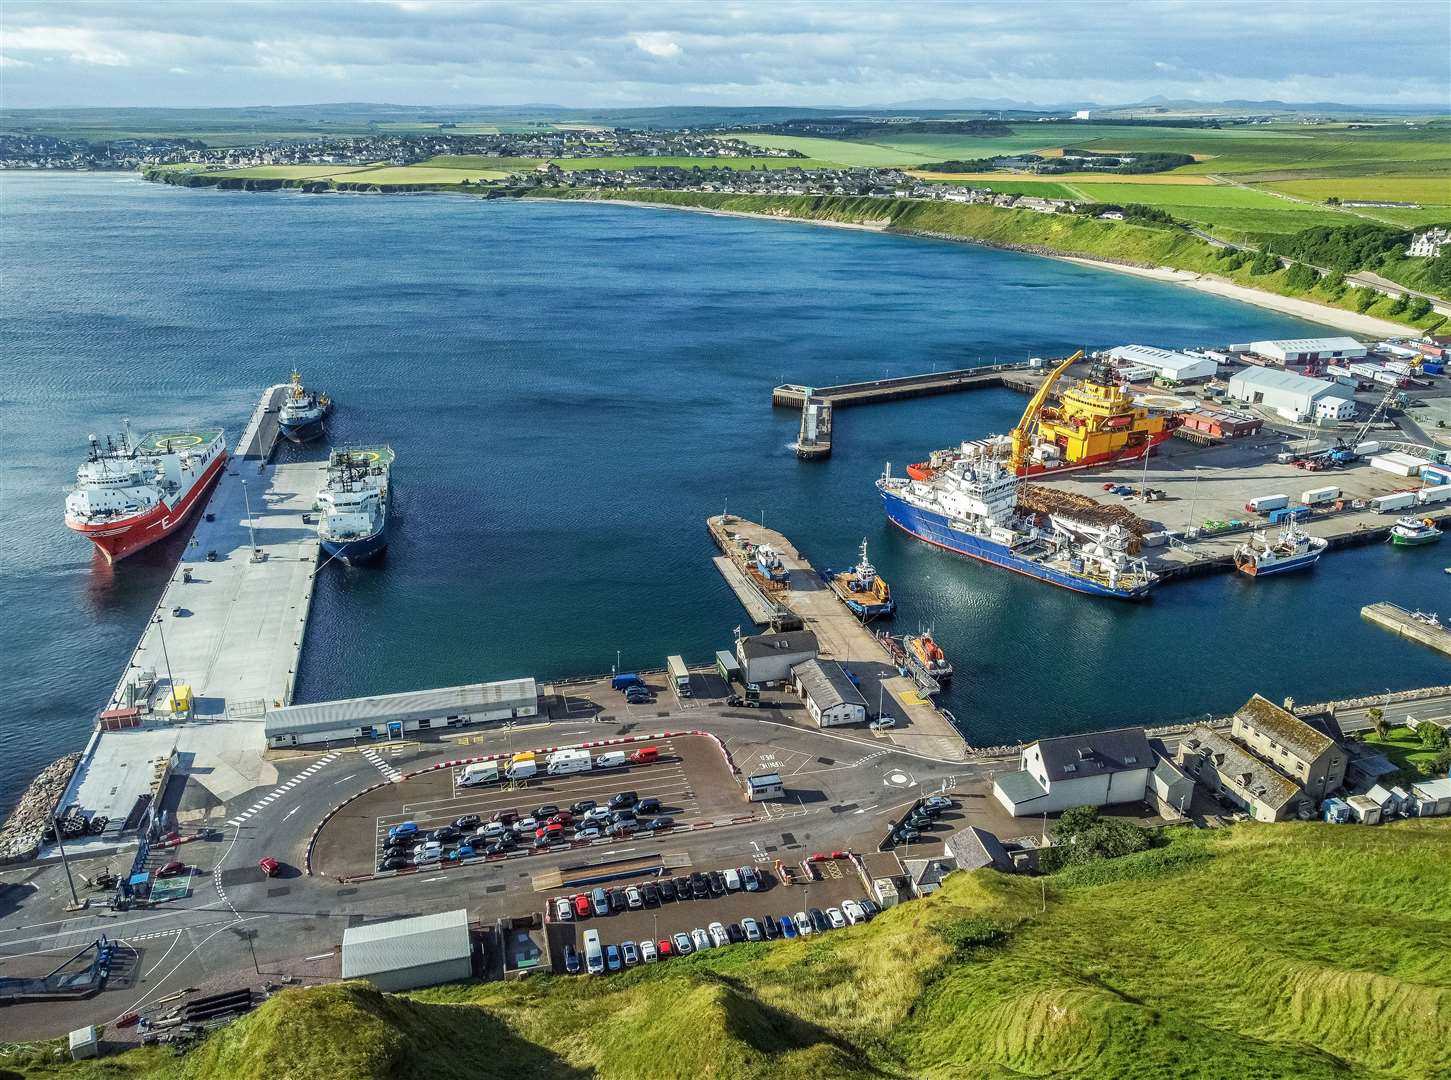 Scrabster Harbour Trust says it is looking forward to continuing to work with the Pentland team on developing the project’s operations and maintenance base.